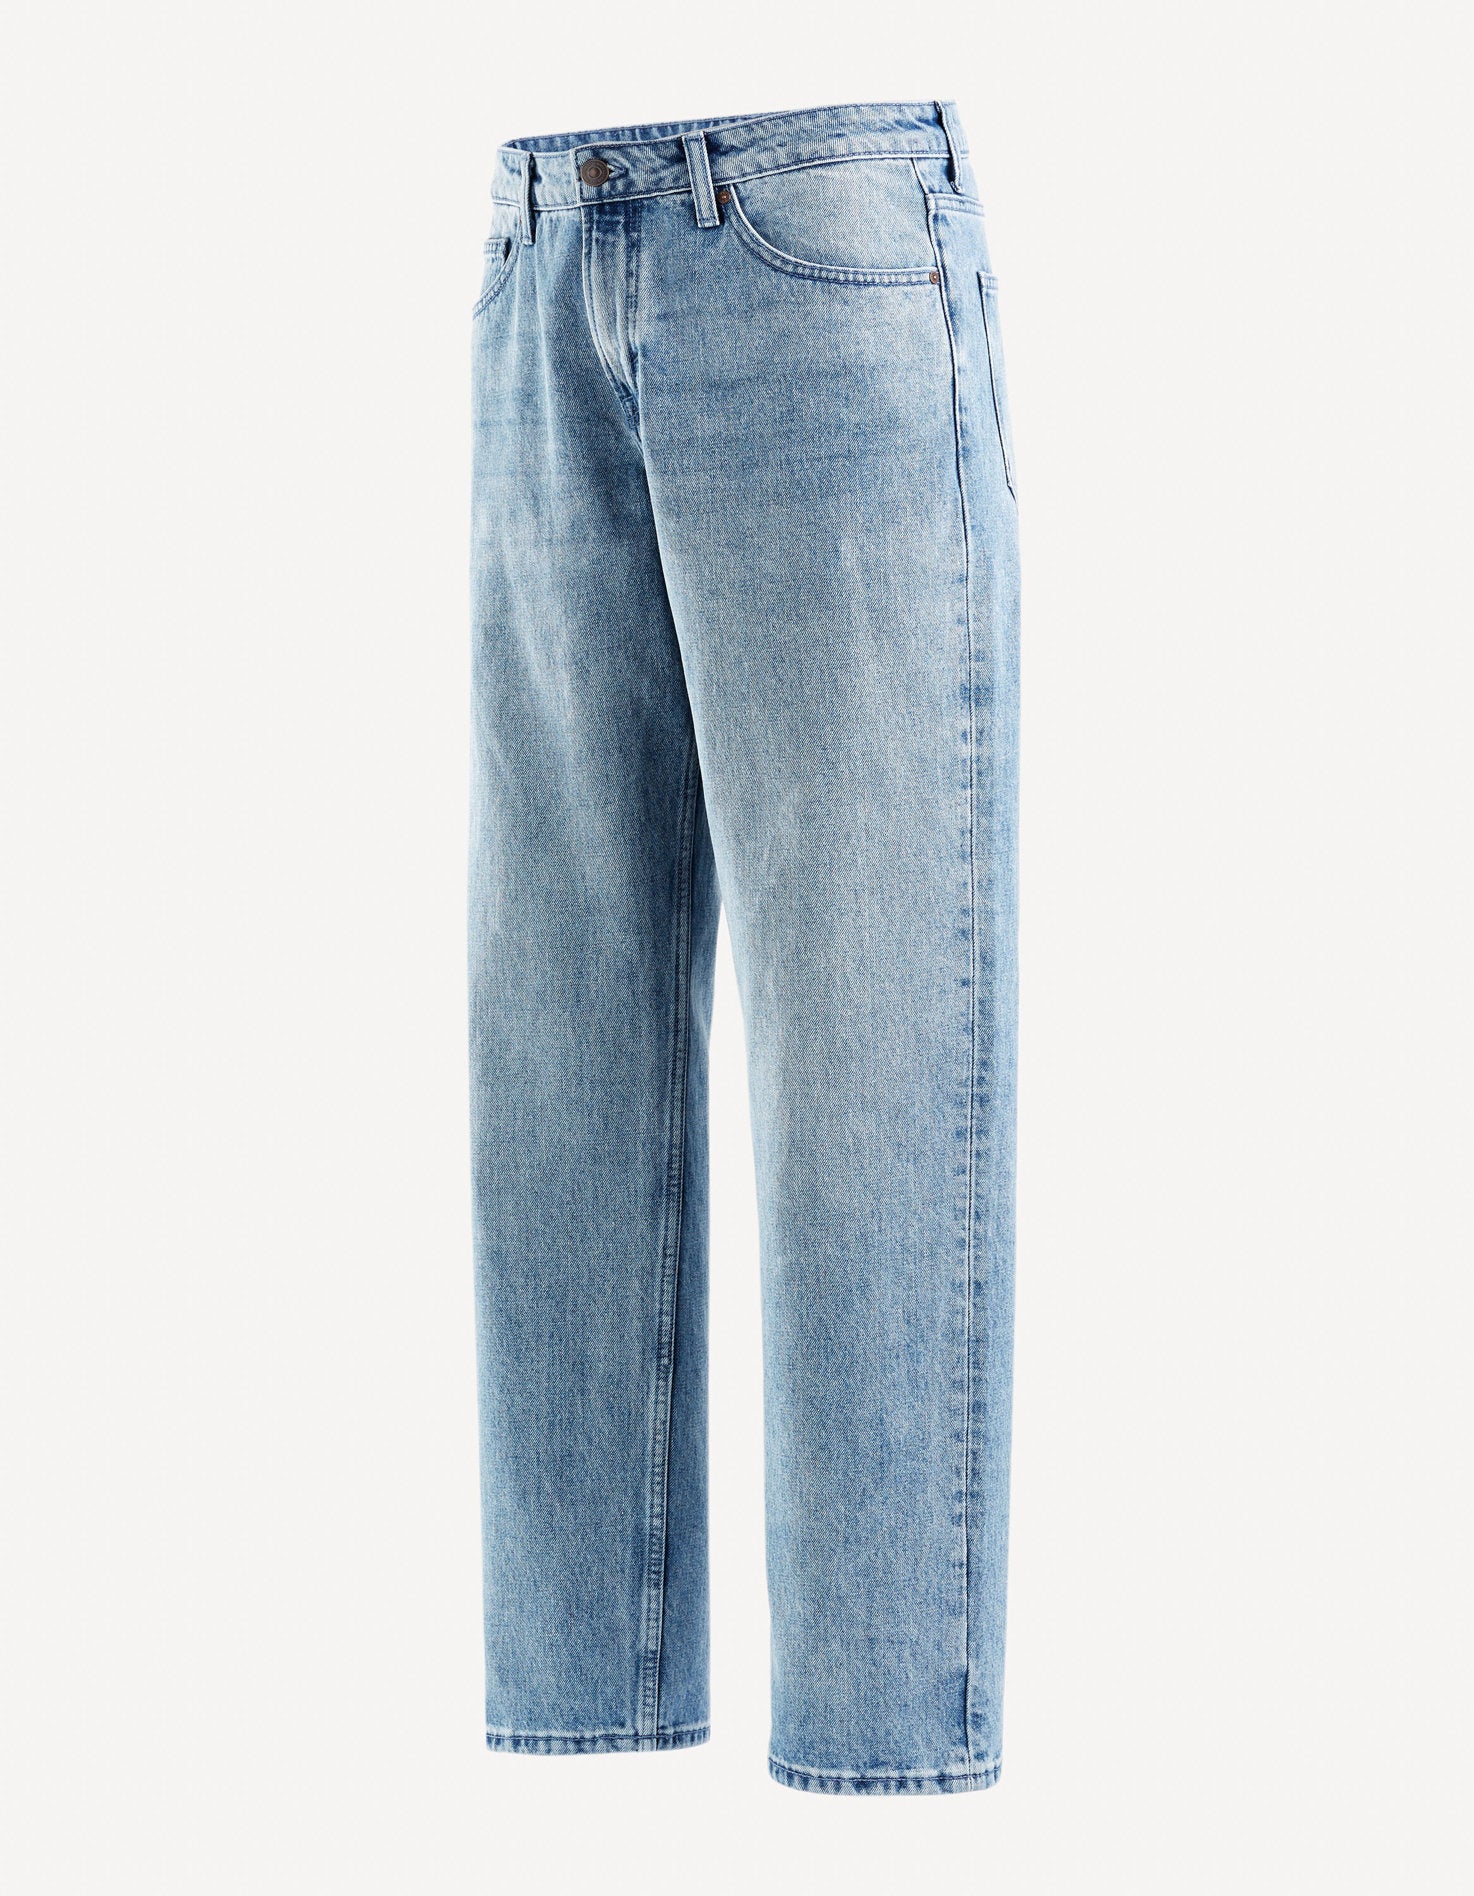 C75 Stretch Loose Jeans - Bleached_FOSTRONG_BLEACHED_03